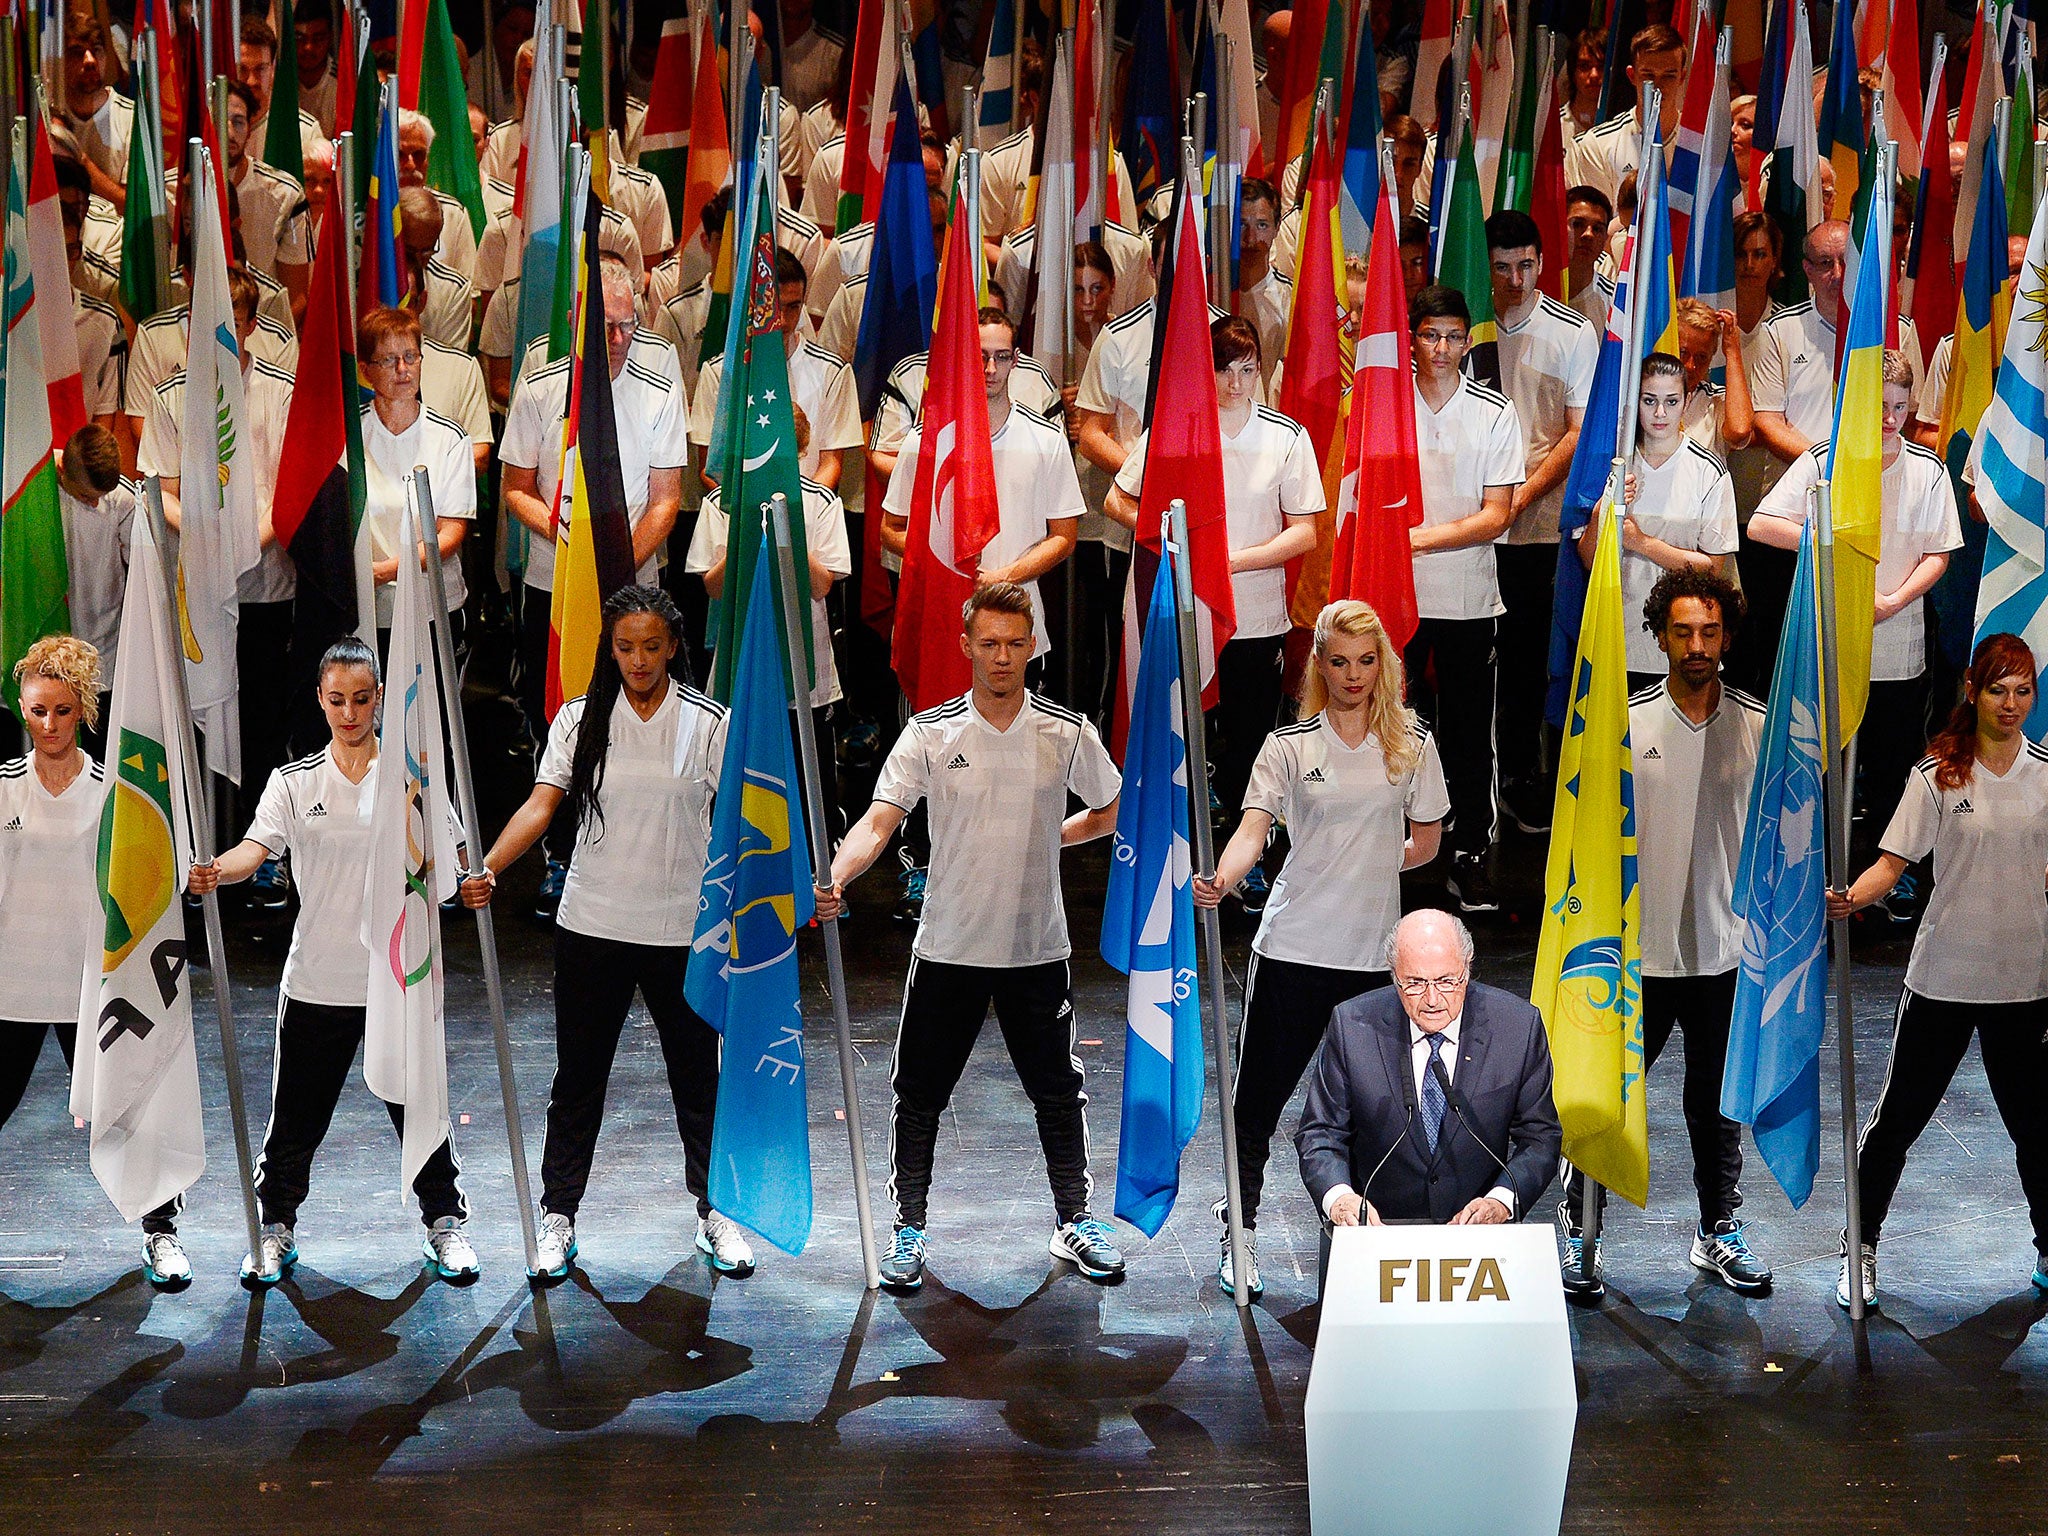 The Fifa president Sepp Blatter at the opening ceremony of the 65th Fifa Congress in Zürich